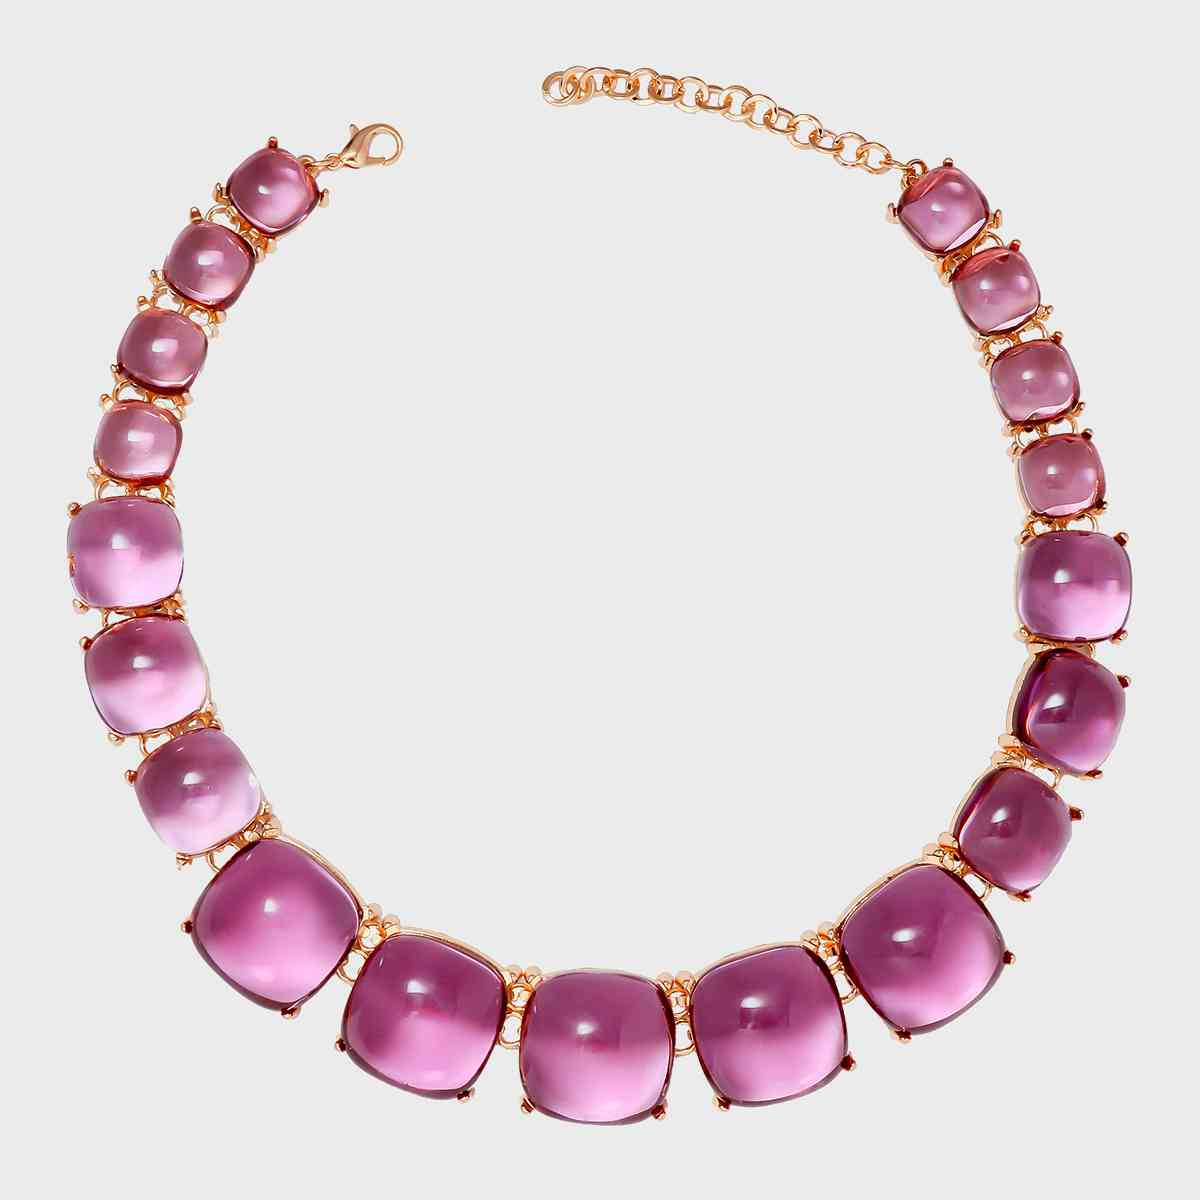 Lavender Alloy & Rhinestone Necklace Sentient Beauty Fashions jewelry